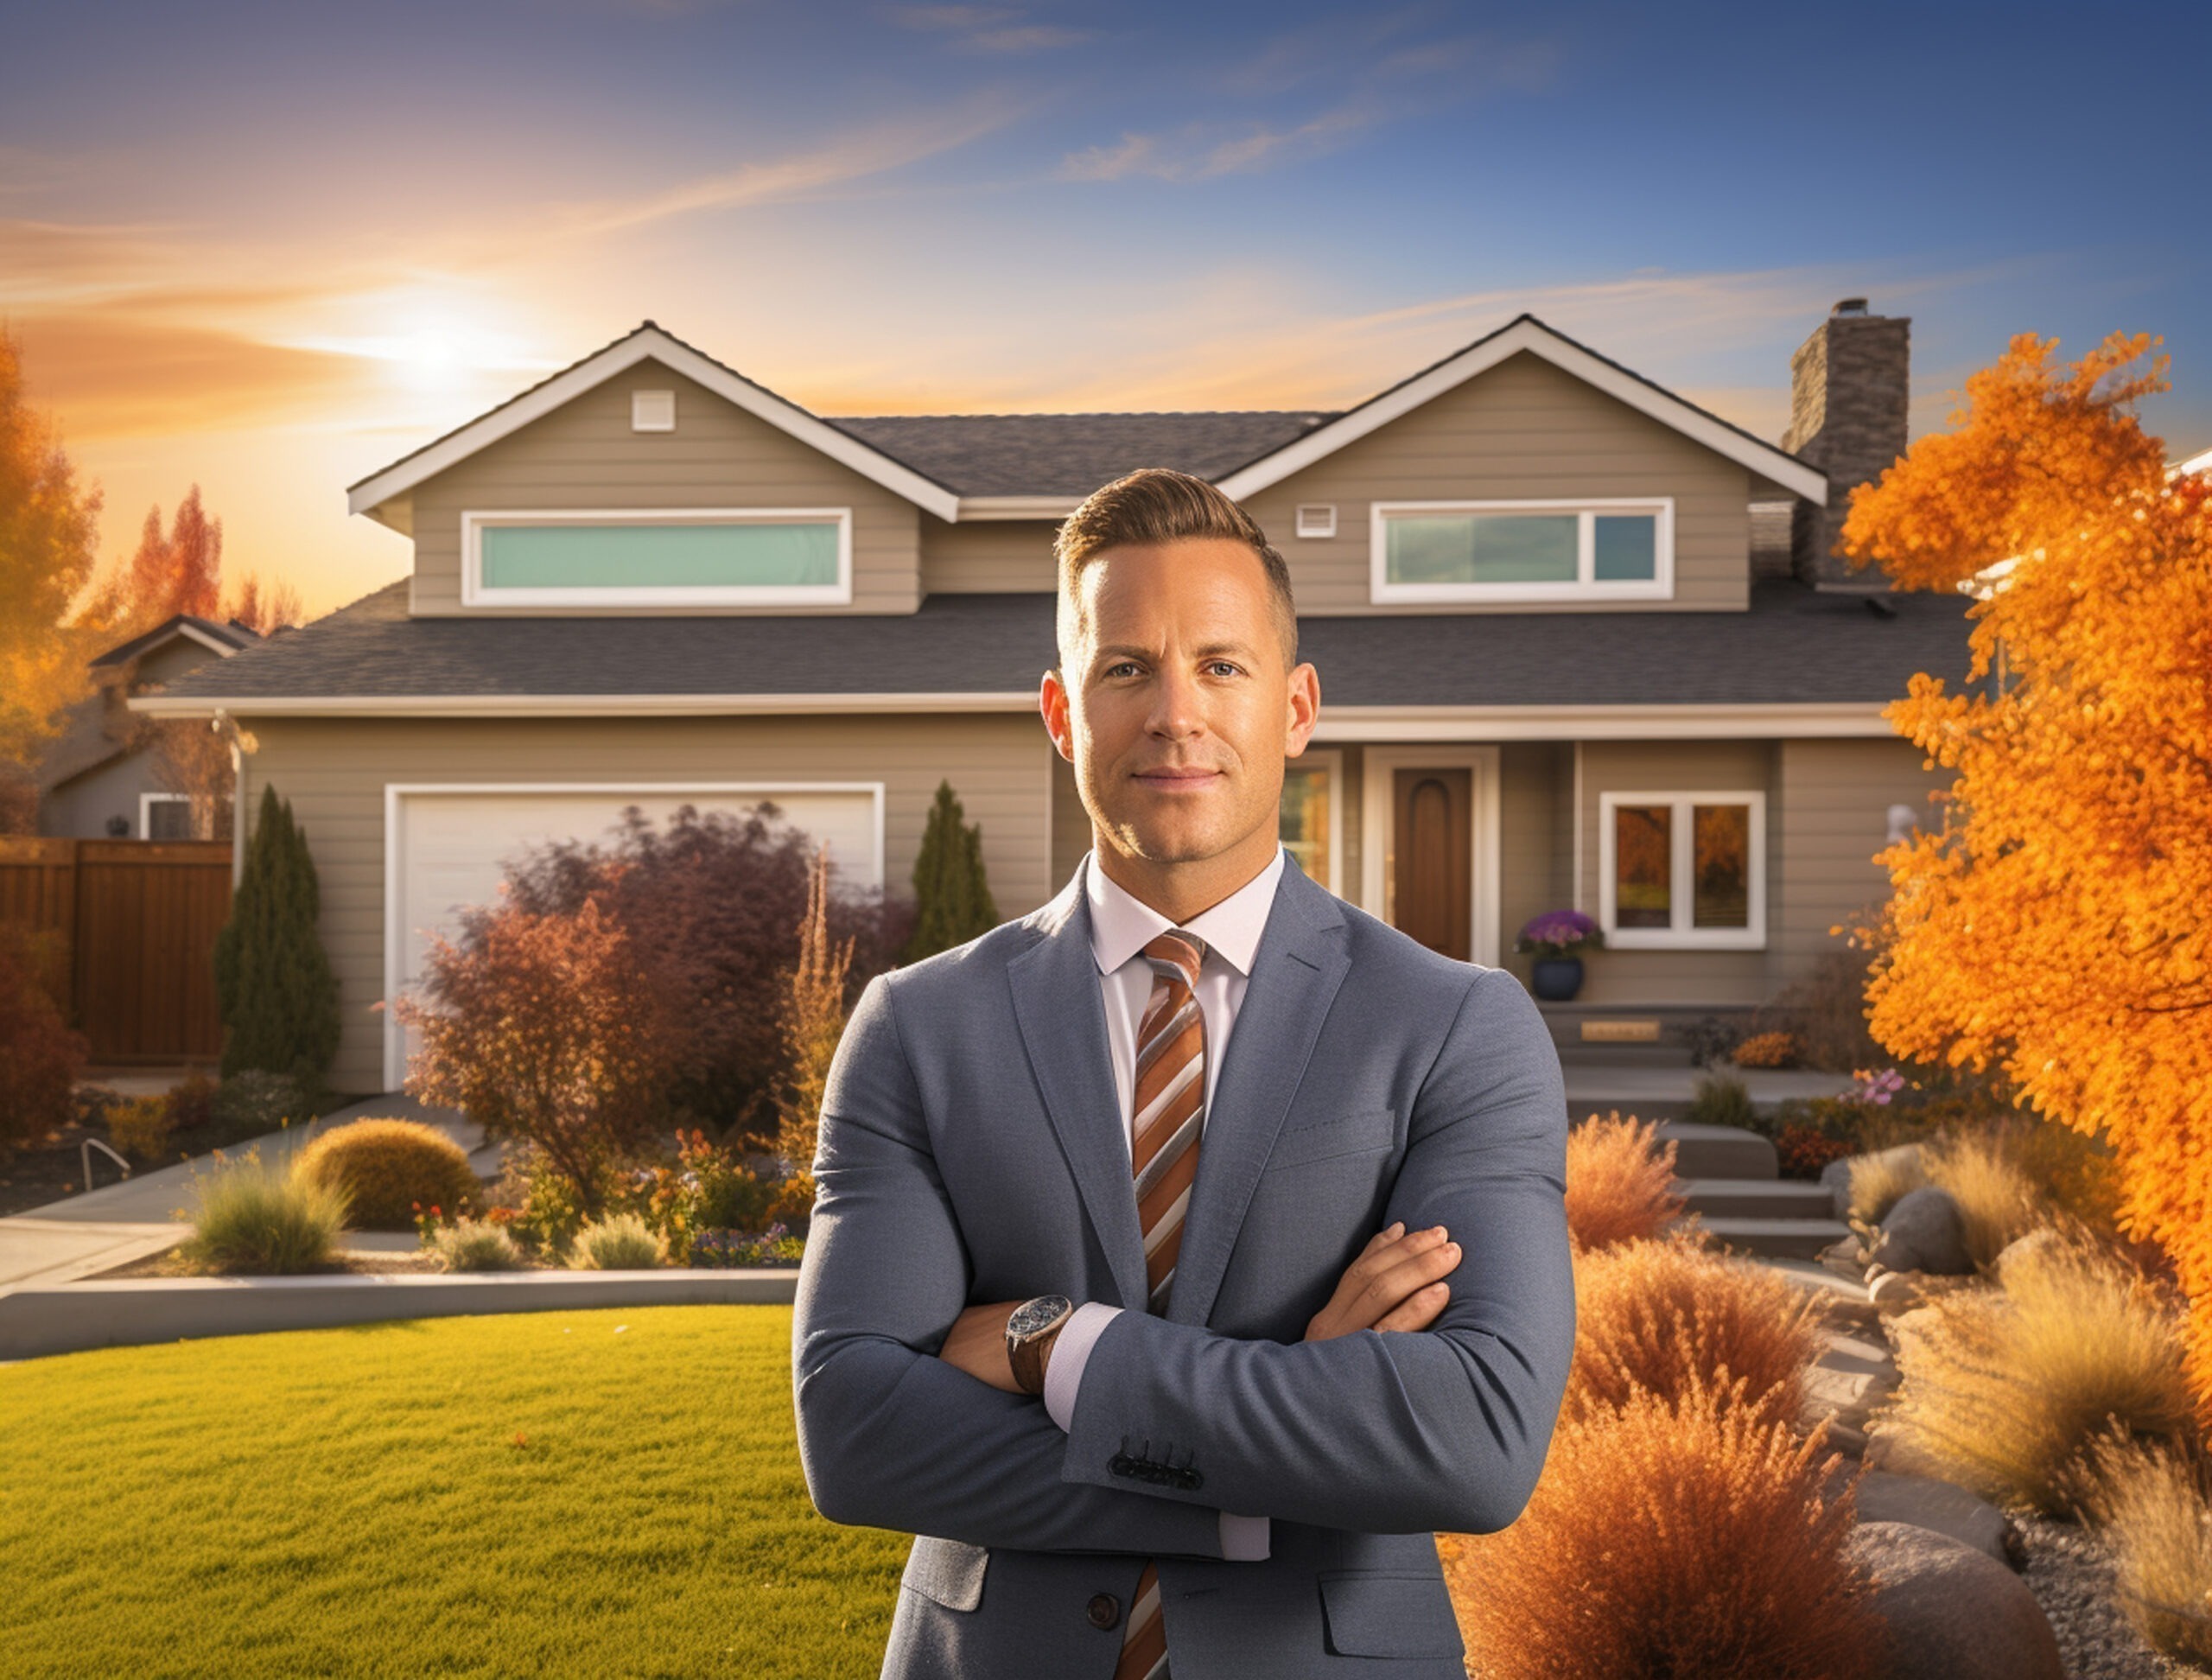 how to become a real estate agent in arkansas